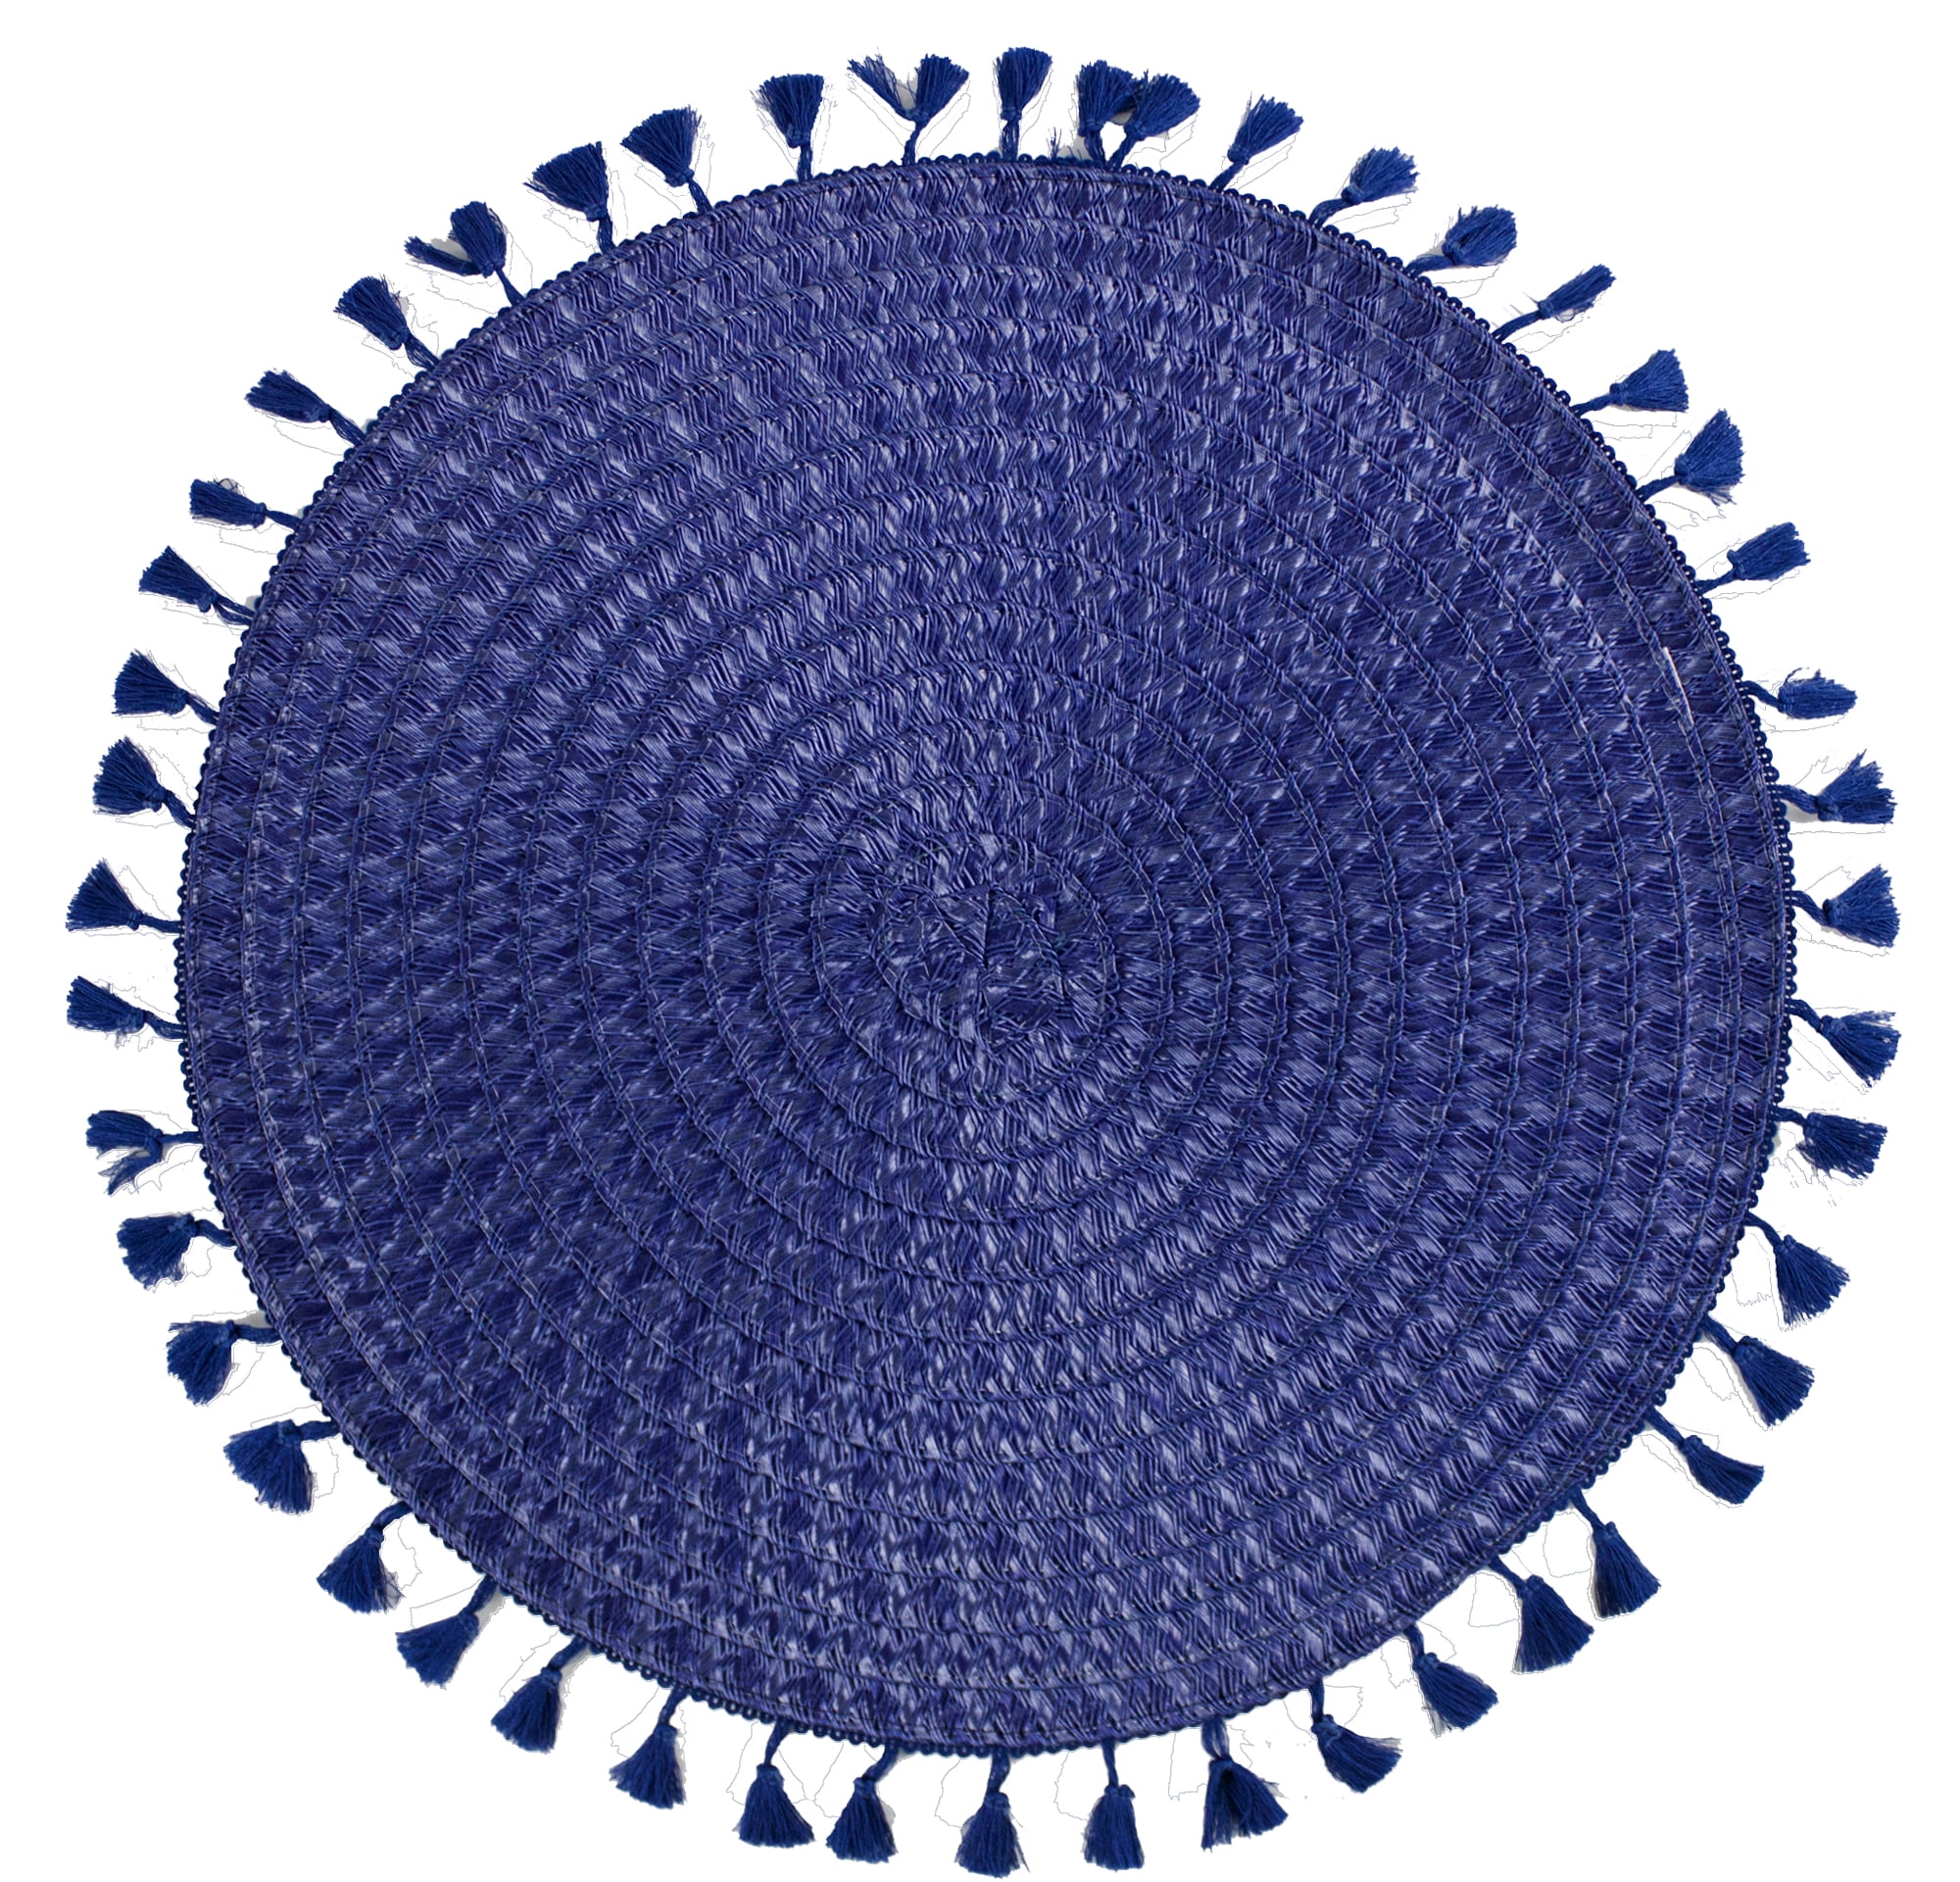 Fennco Styles Tasseled Woven, Navy Blue Round Placemats